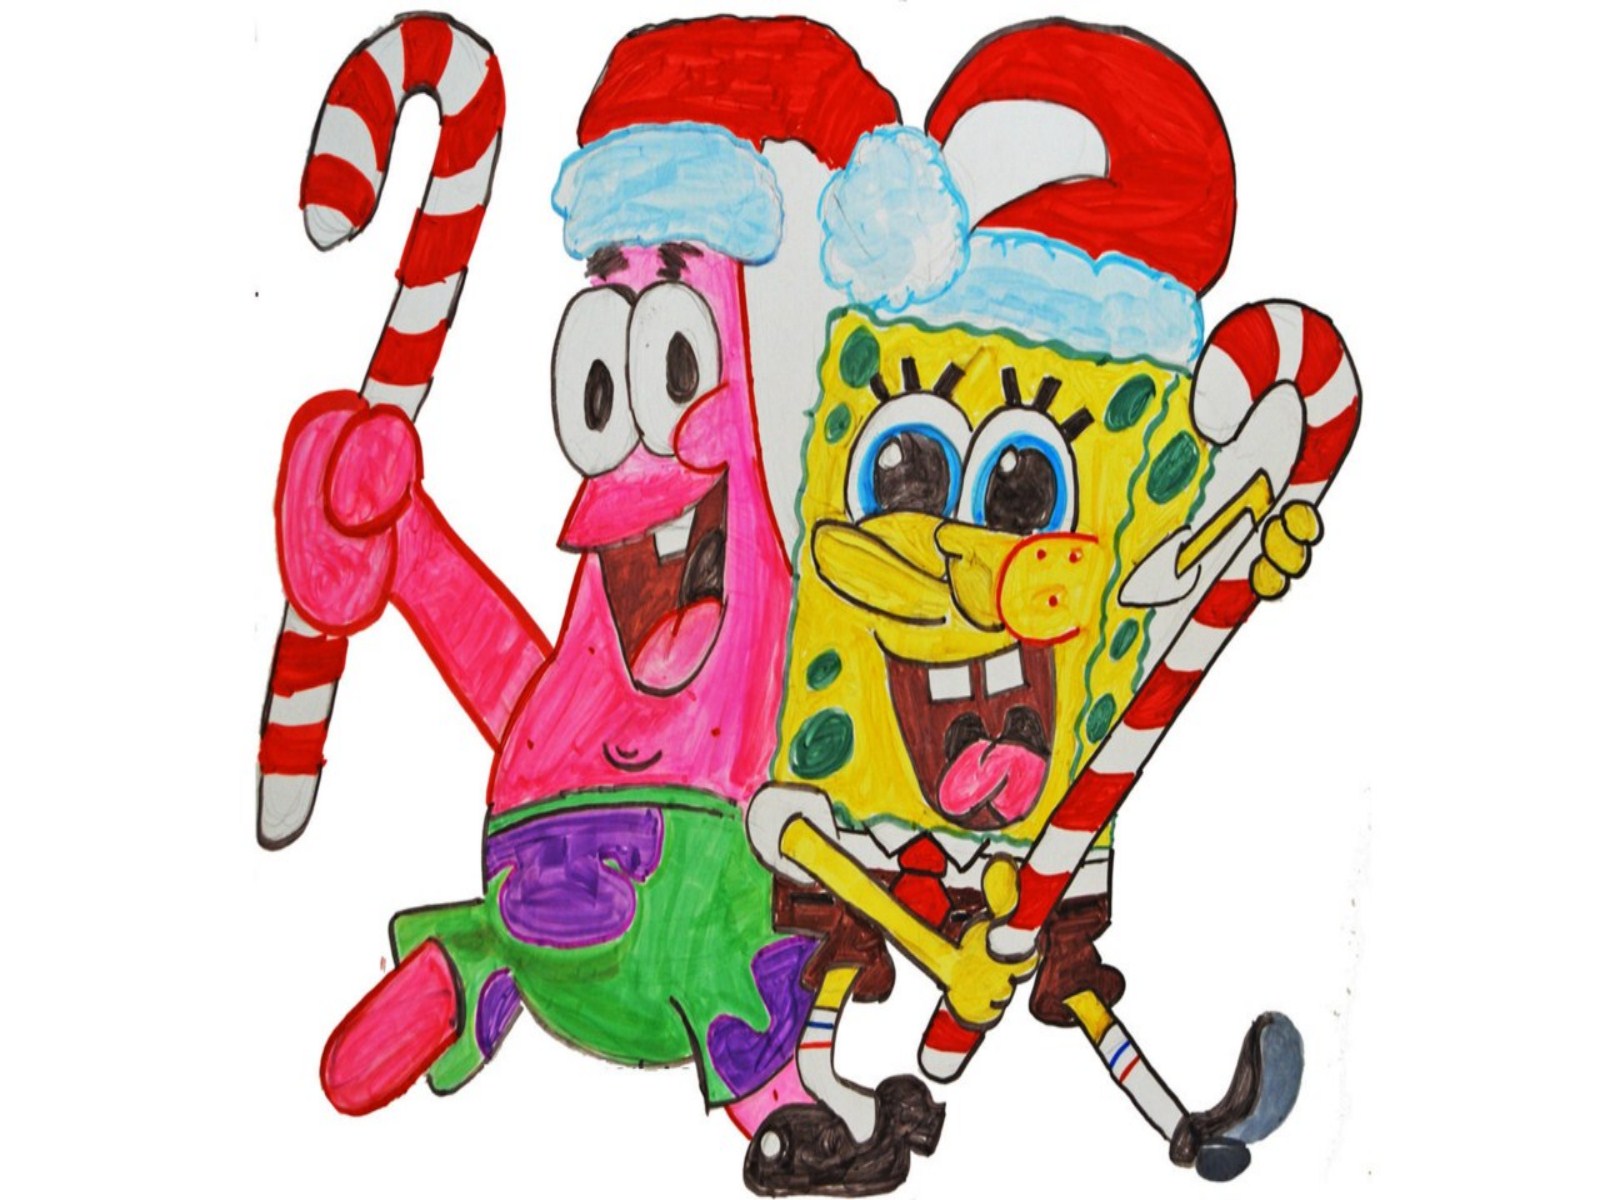 Spongebob Christmas Pictures - Wallpapers High Definition